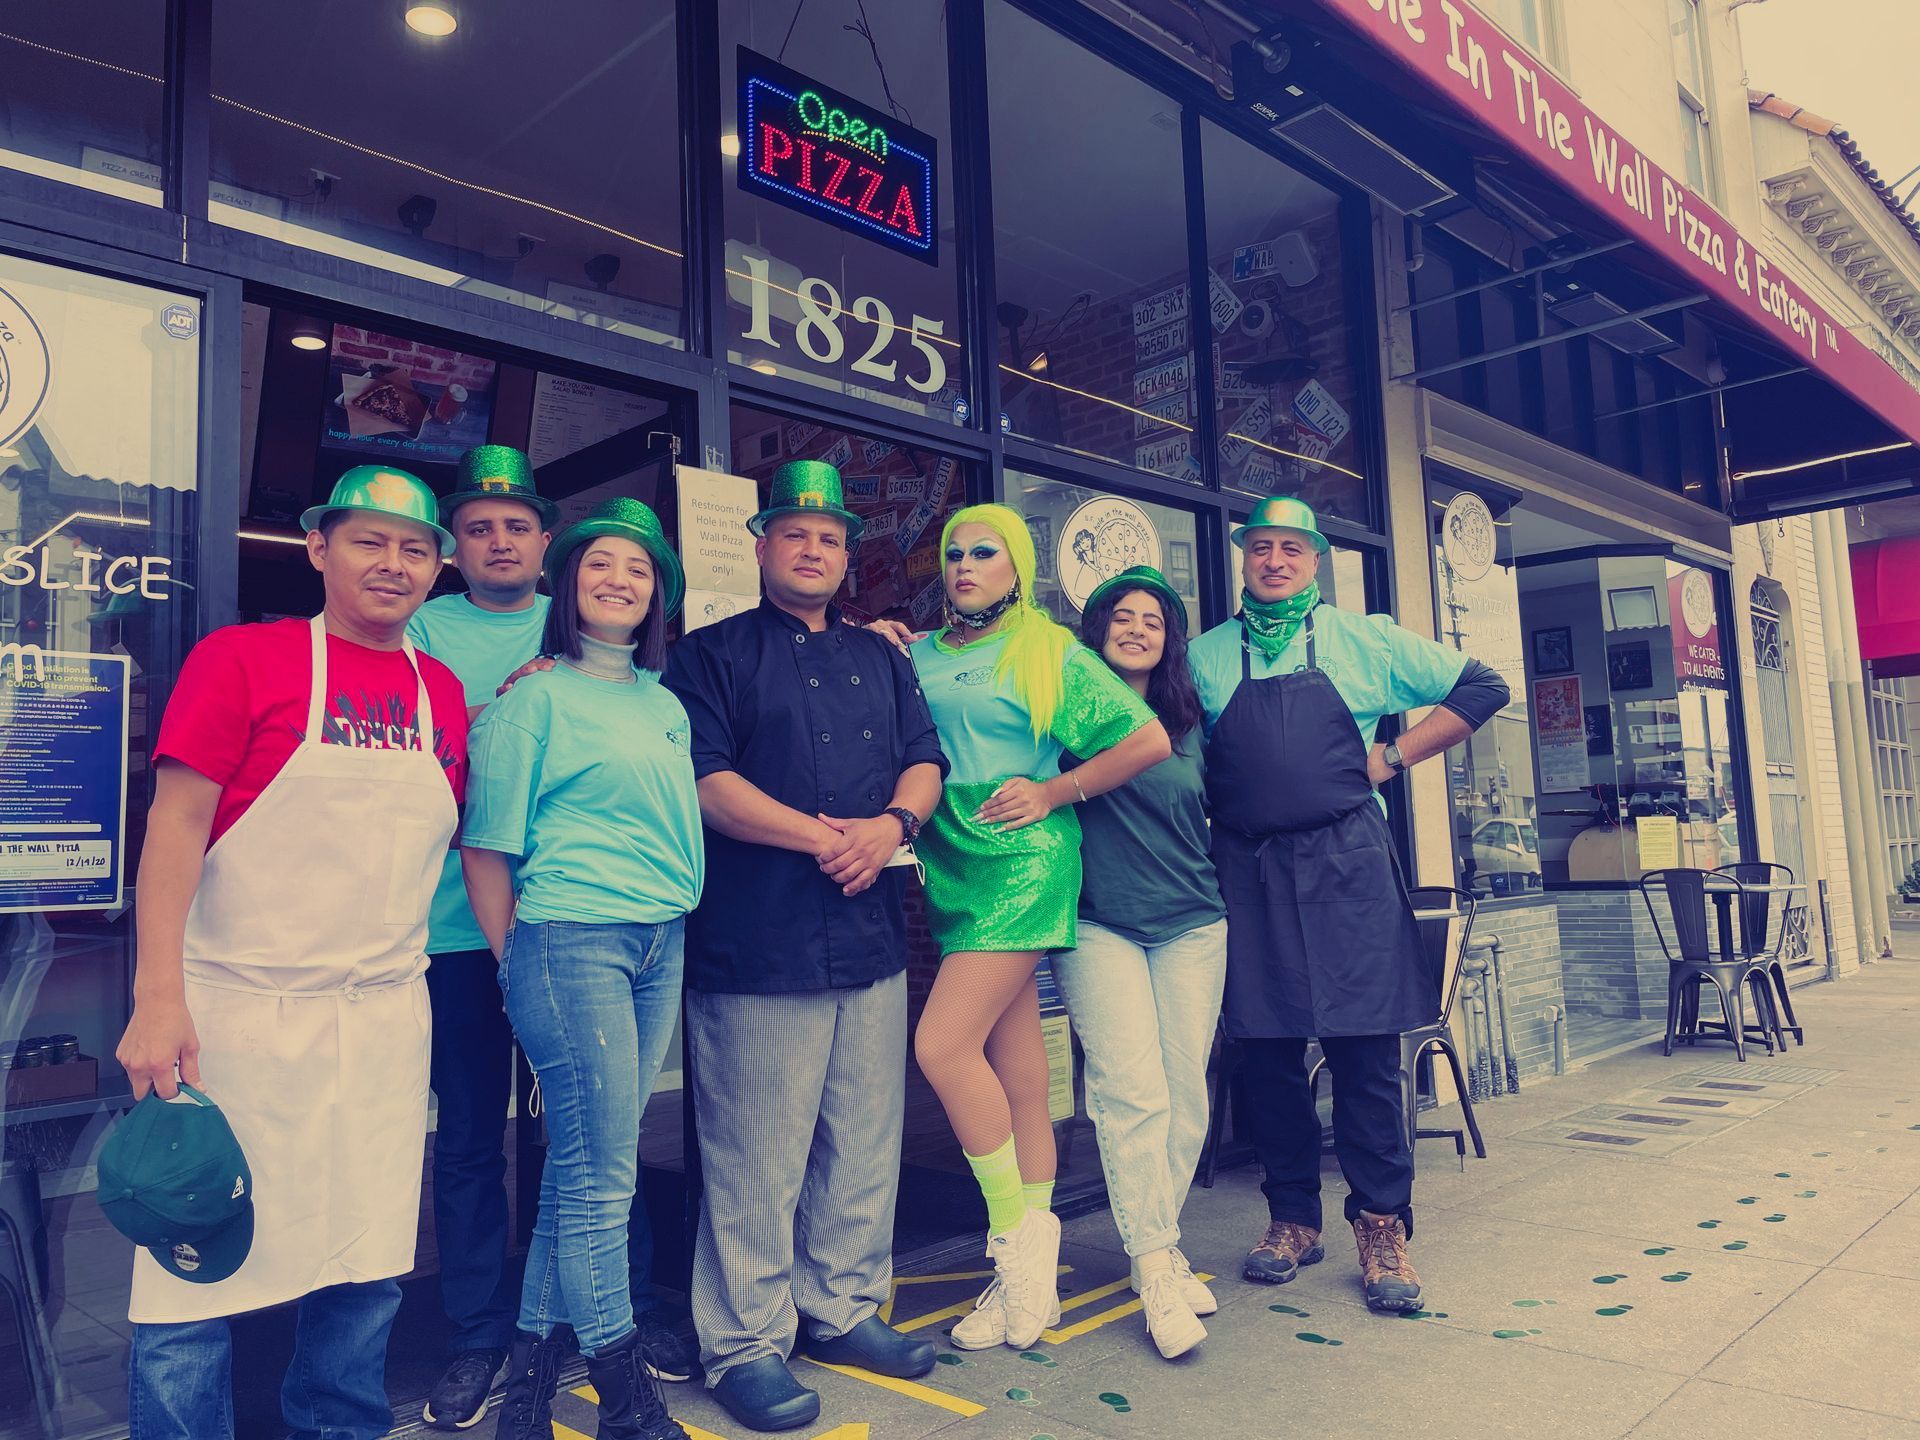 A group of people are posing for a picture in front of a pizza restaurant.